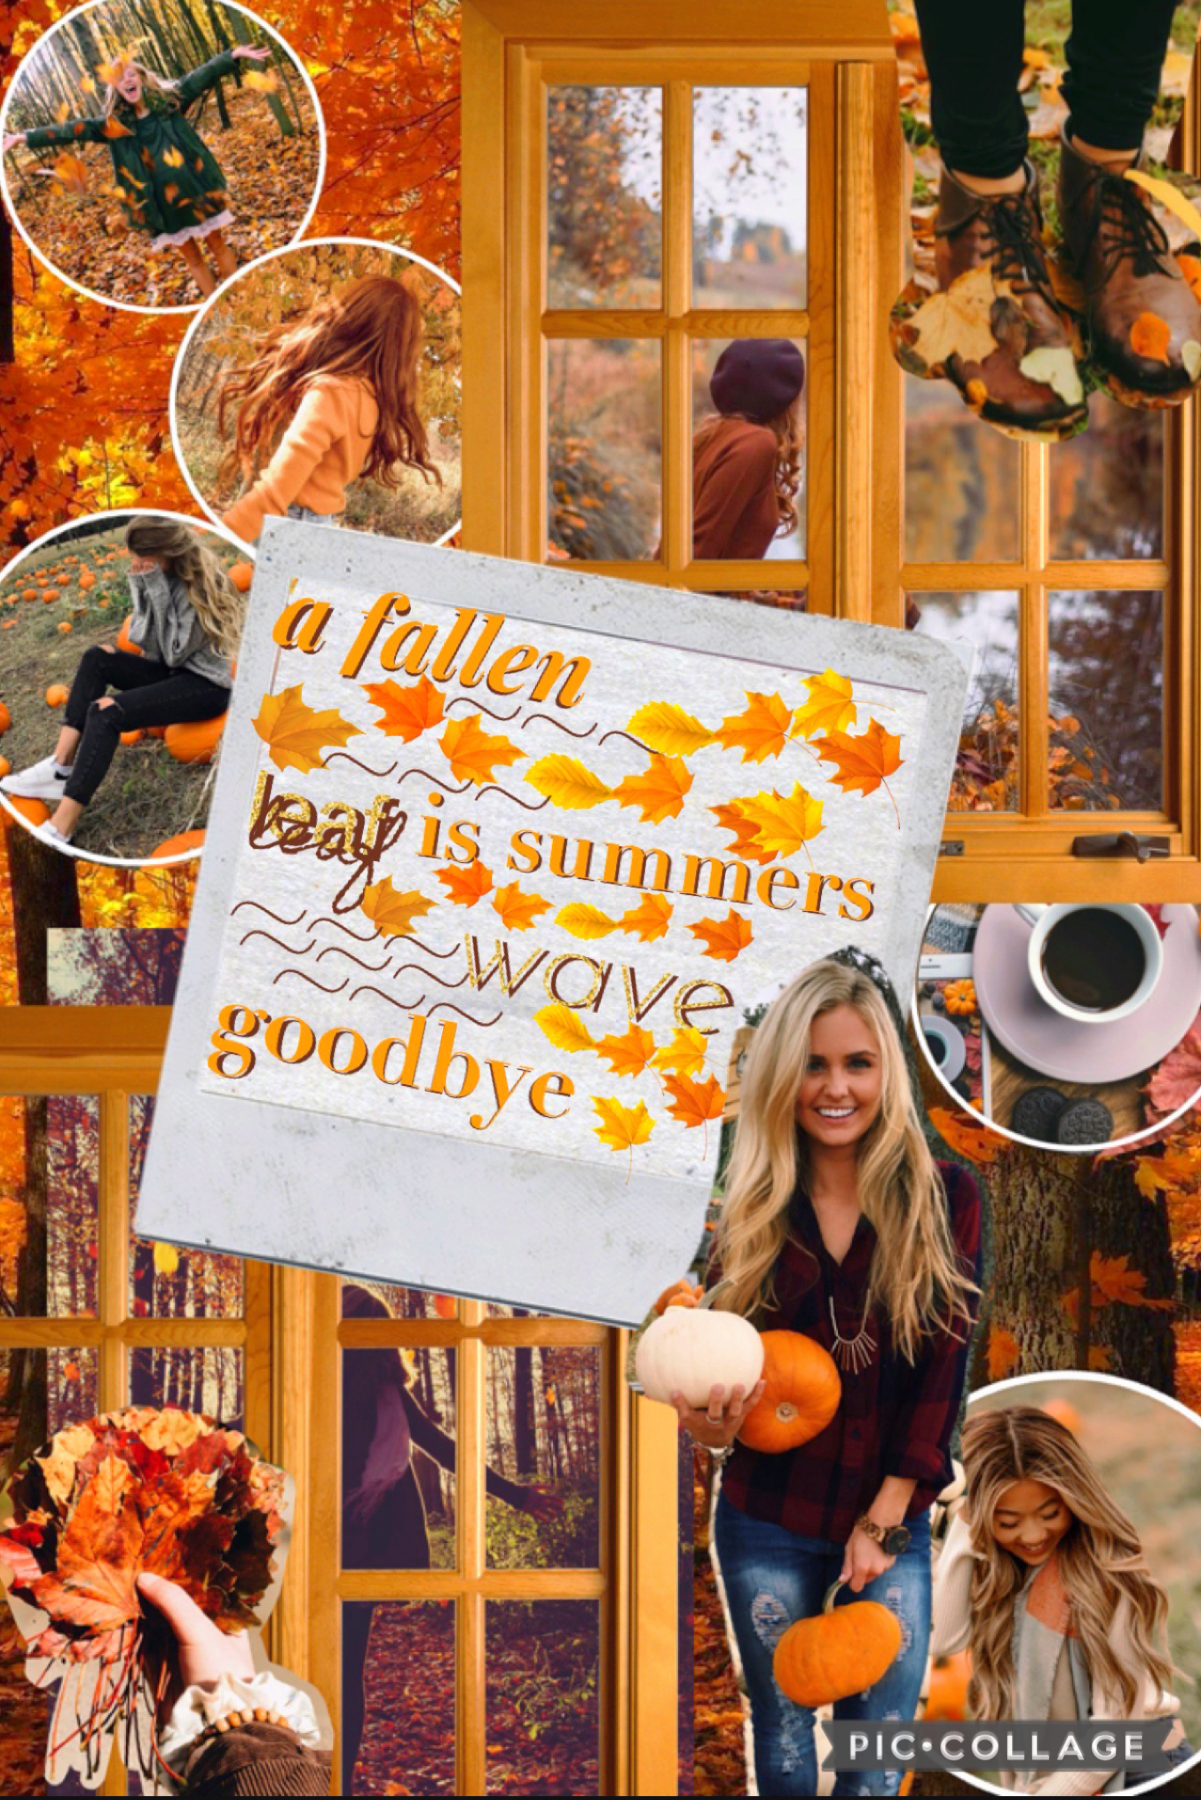 🍂tap🍂
fall is almost over and im so excited for christmas!but i thought id hit y'all with one more fall collage i have been meaning to post for forever oops😂anyways i hope everyone had a fun halloween and has a happy thanksgiving 